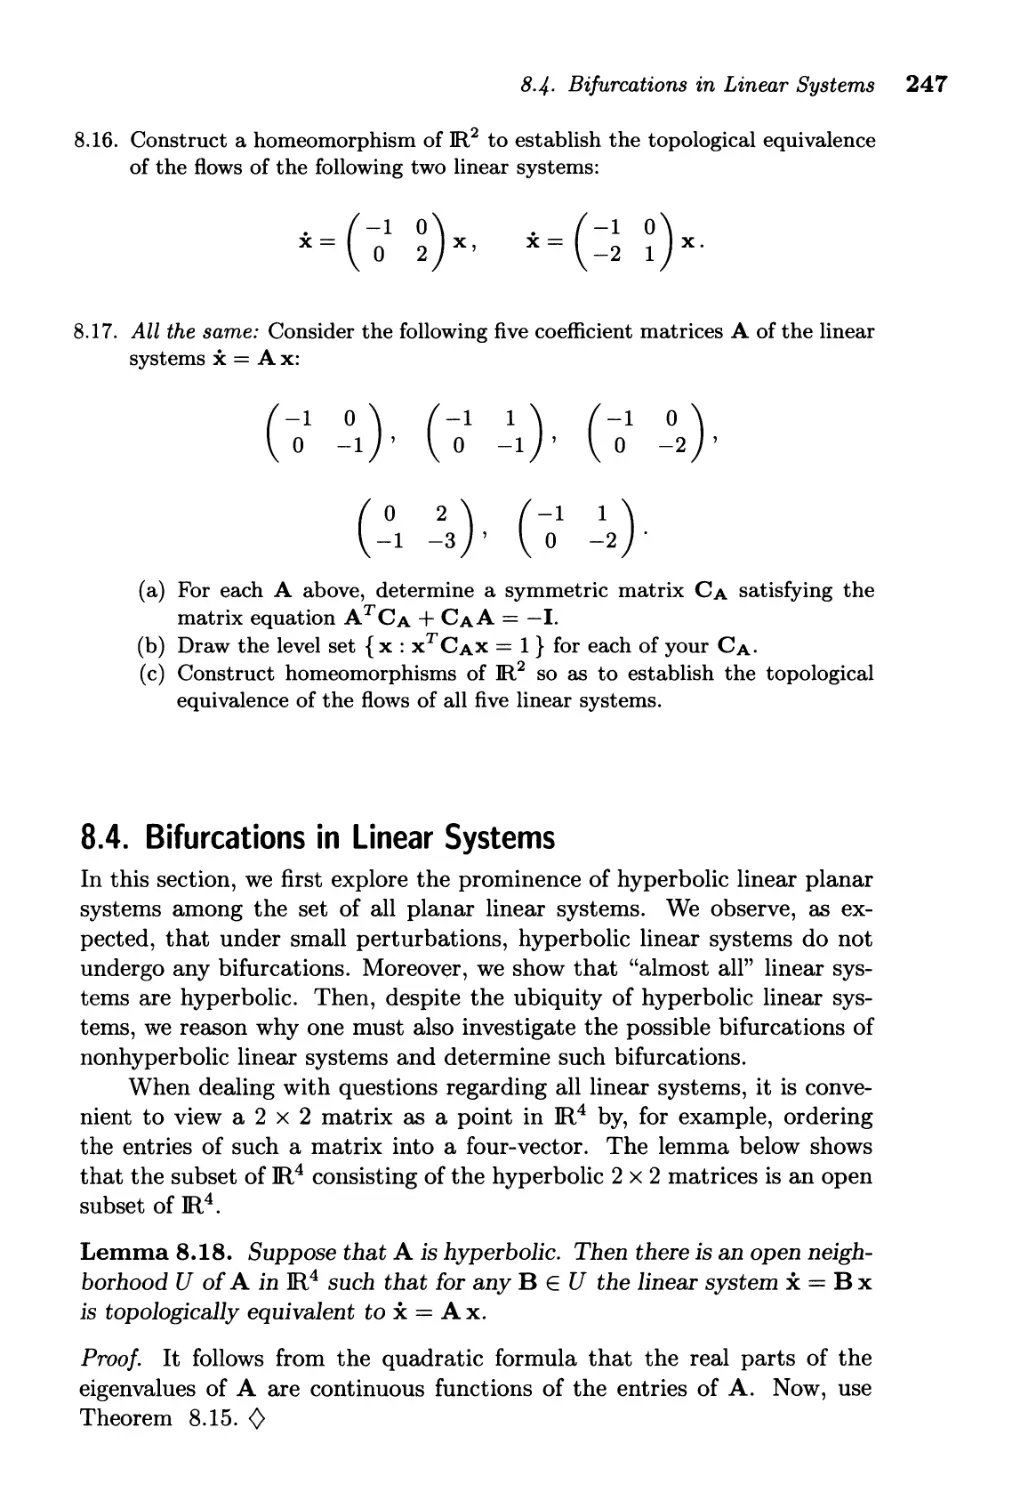 8.4. Bifurcations in Linear Systems